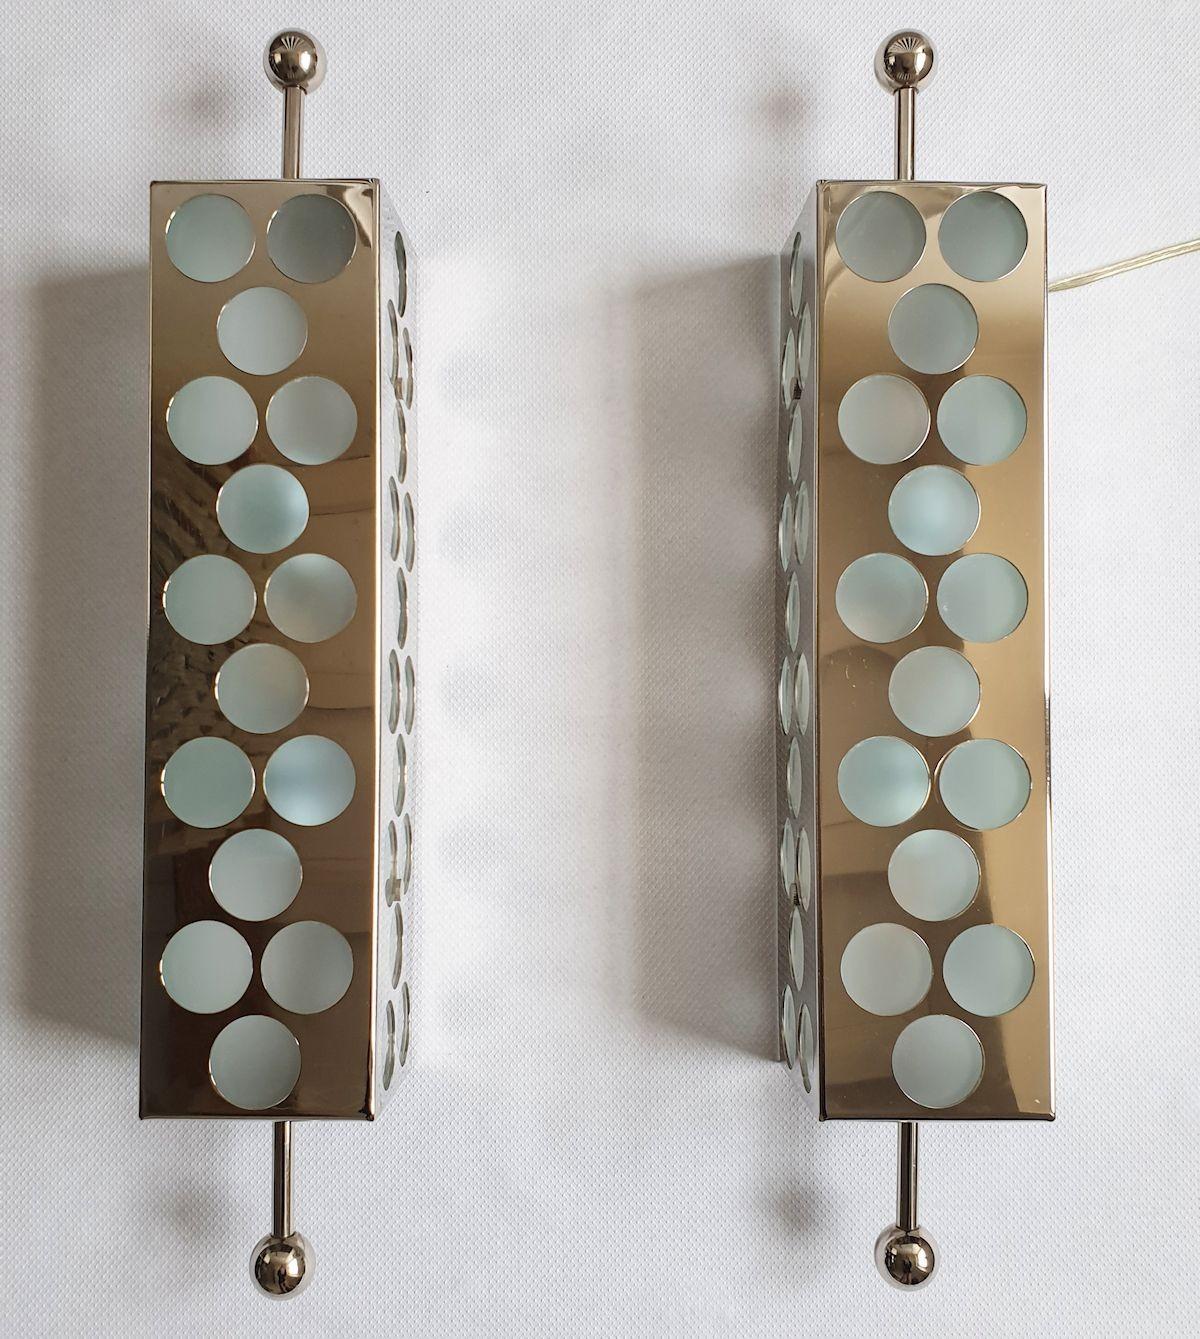 Pair of modern geometric vintage wall sconces, in the style of Sciolari, Italy 1980s.
The Mid-Century Modern sconces are made of nickel and frosted glass.
They have a Mid-Mod trendy design.
The Italian sconces have 2 lights each and are